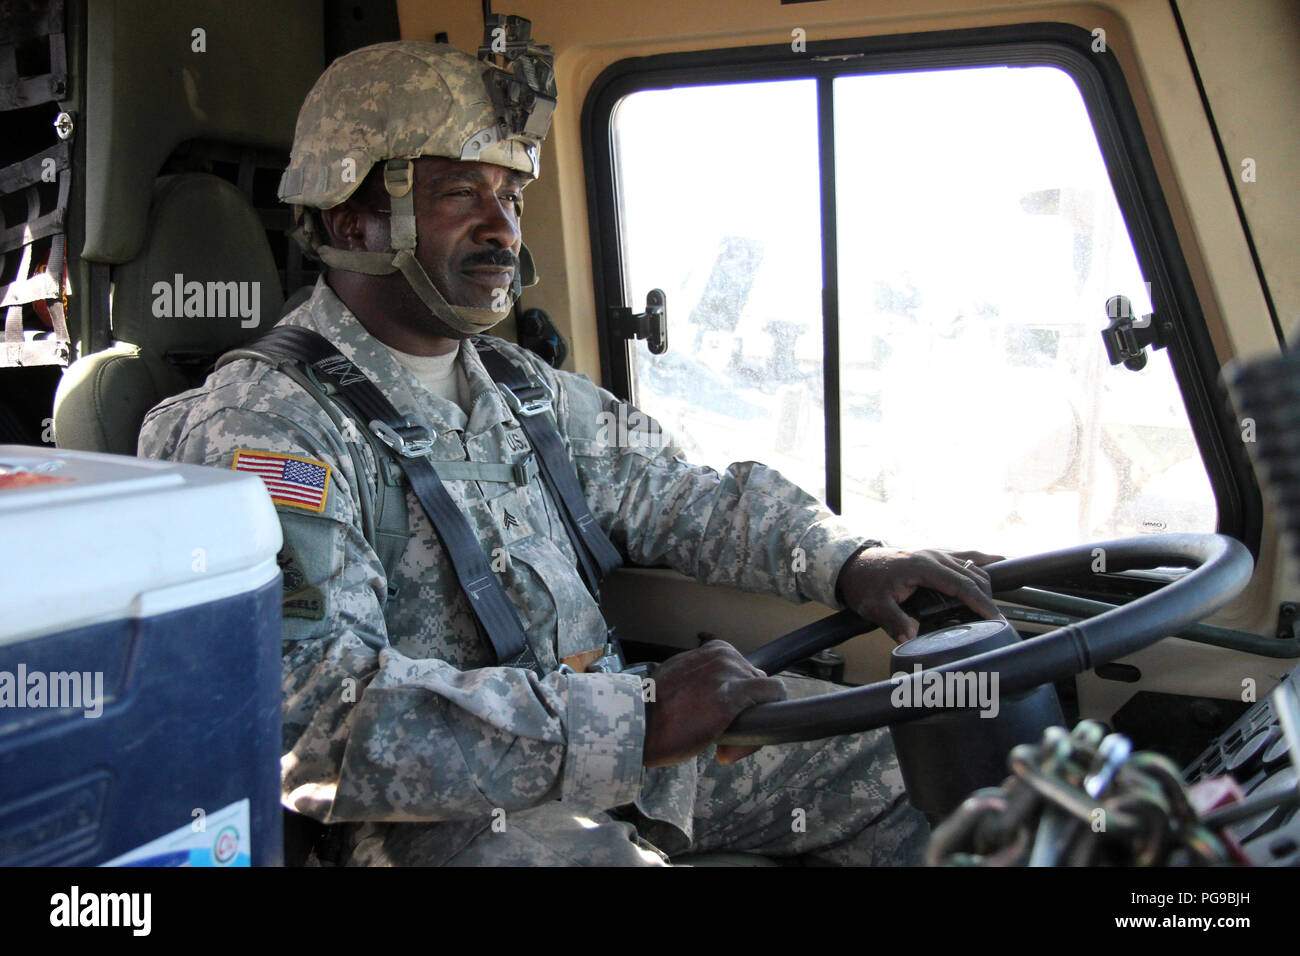 Sgt. Jerome Lee, a light-wheeled mechanic with Echo Company, 328th Brigade Support Battalion, 56th Stryker Brigade Combat Team, 28th Infantry Division, Pennsylvania Army National Guard, gets ready to drive a light medium tactical vehicle in a convoy from the National Training Center, Fort Irwin to the railhead in Yermo, California Aug. 19. After the 56th SBCT finishes the combat training rotation at NTC, the vehicles belonging to the Pennsylvania Guard must then be transported via train to Mechanicsburg, Pennsylvania, where they will be returned to their home units. (U.S. Army National Guard p Stock Photo